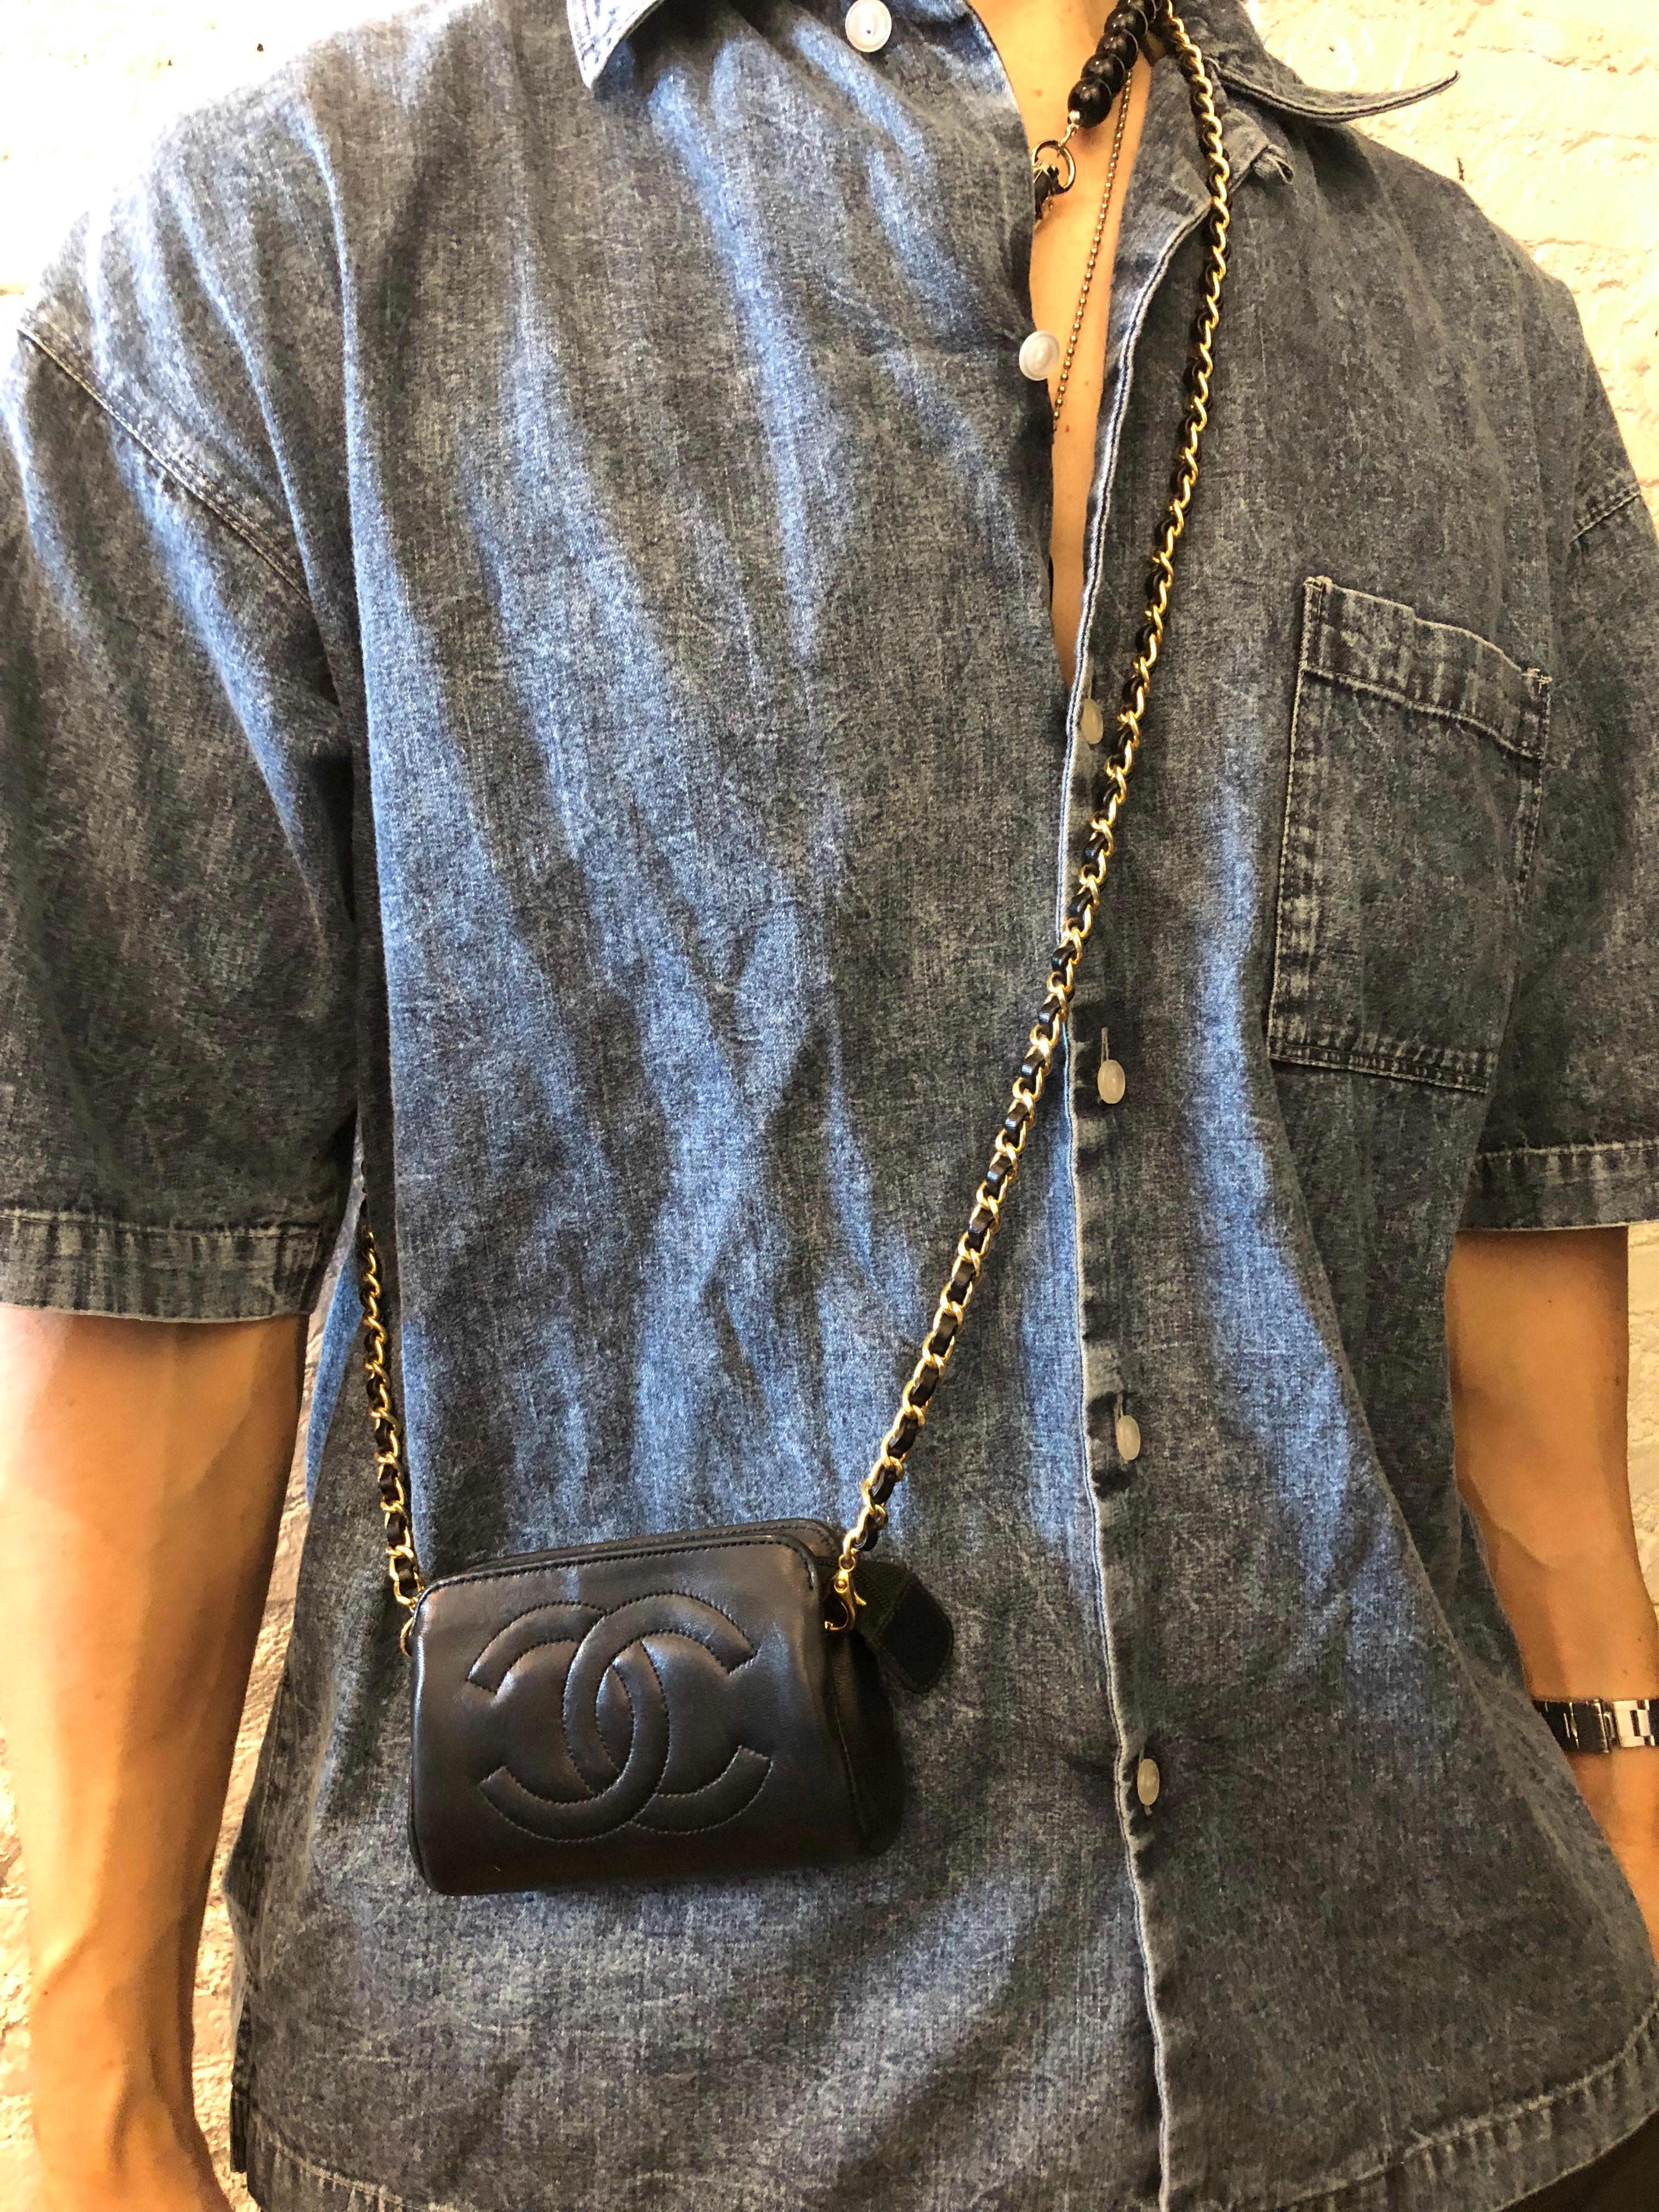 This CHANEL mini pouch bag is crafted of lambskin leather in black. Top zipper closure opens to a new interior in beige. Made in France. Measures approximately 5 x 3.25 x 1.5 inches. Holo sticker removed in the re-lining process. Third party